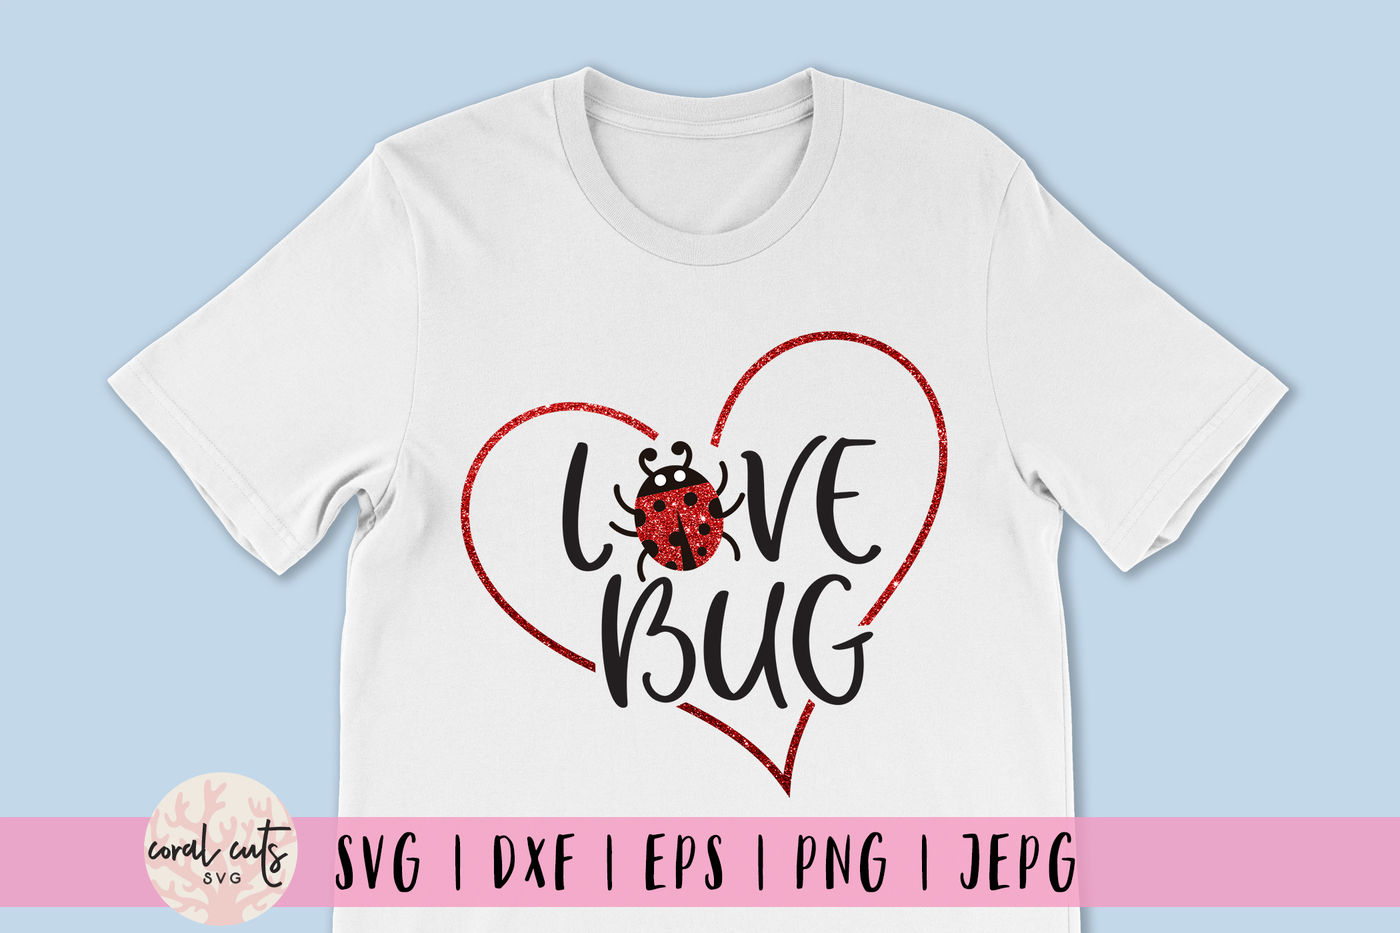 ori 3521980 137d4b68bbfb0044a6712fcc16420a3c1d076c4f love bug love svg eps dxf png